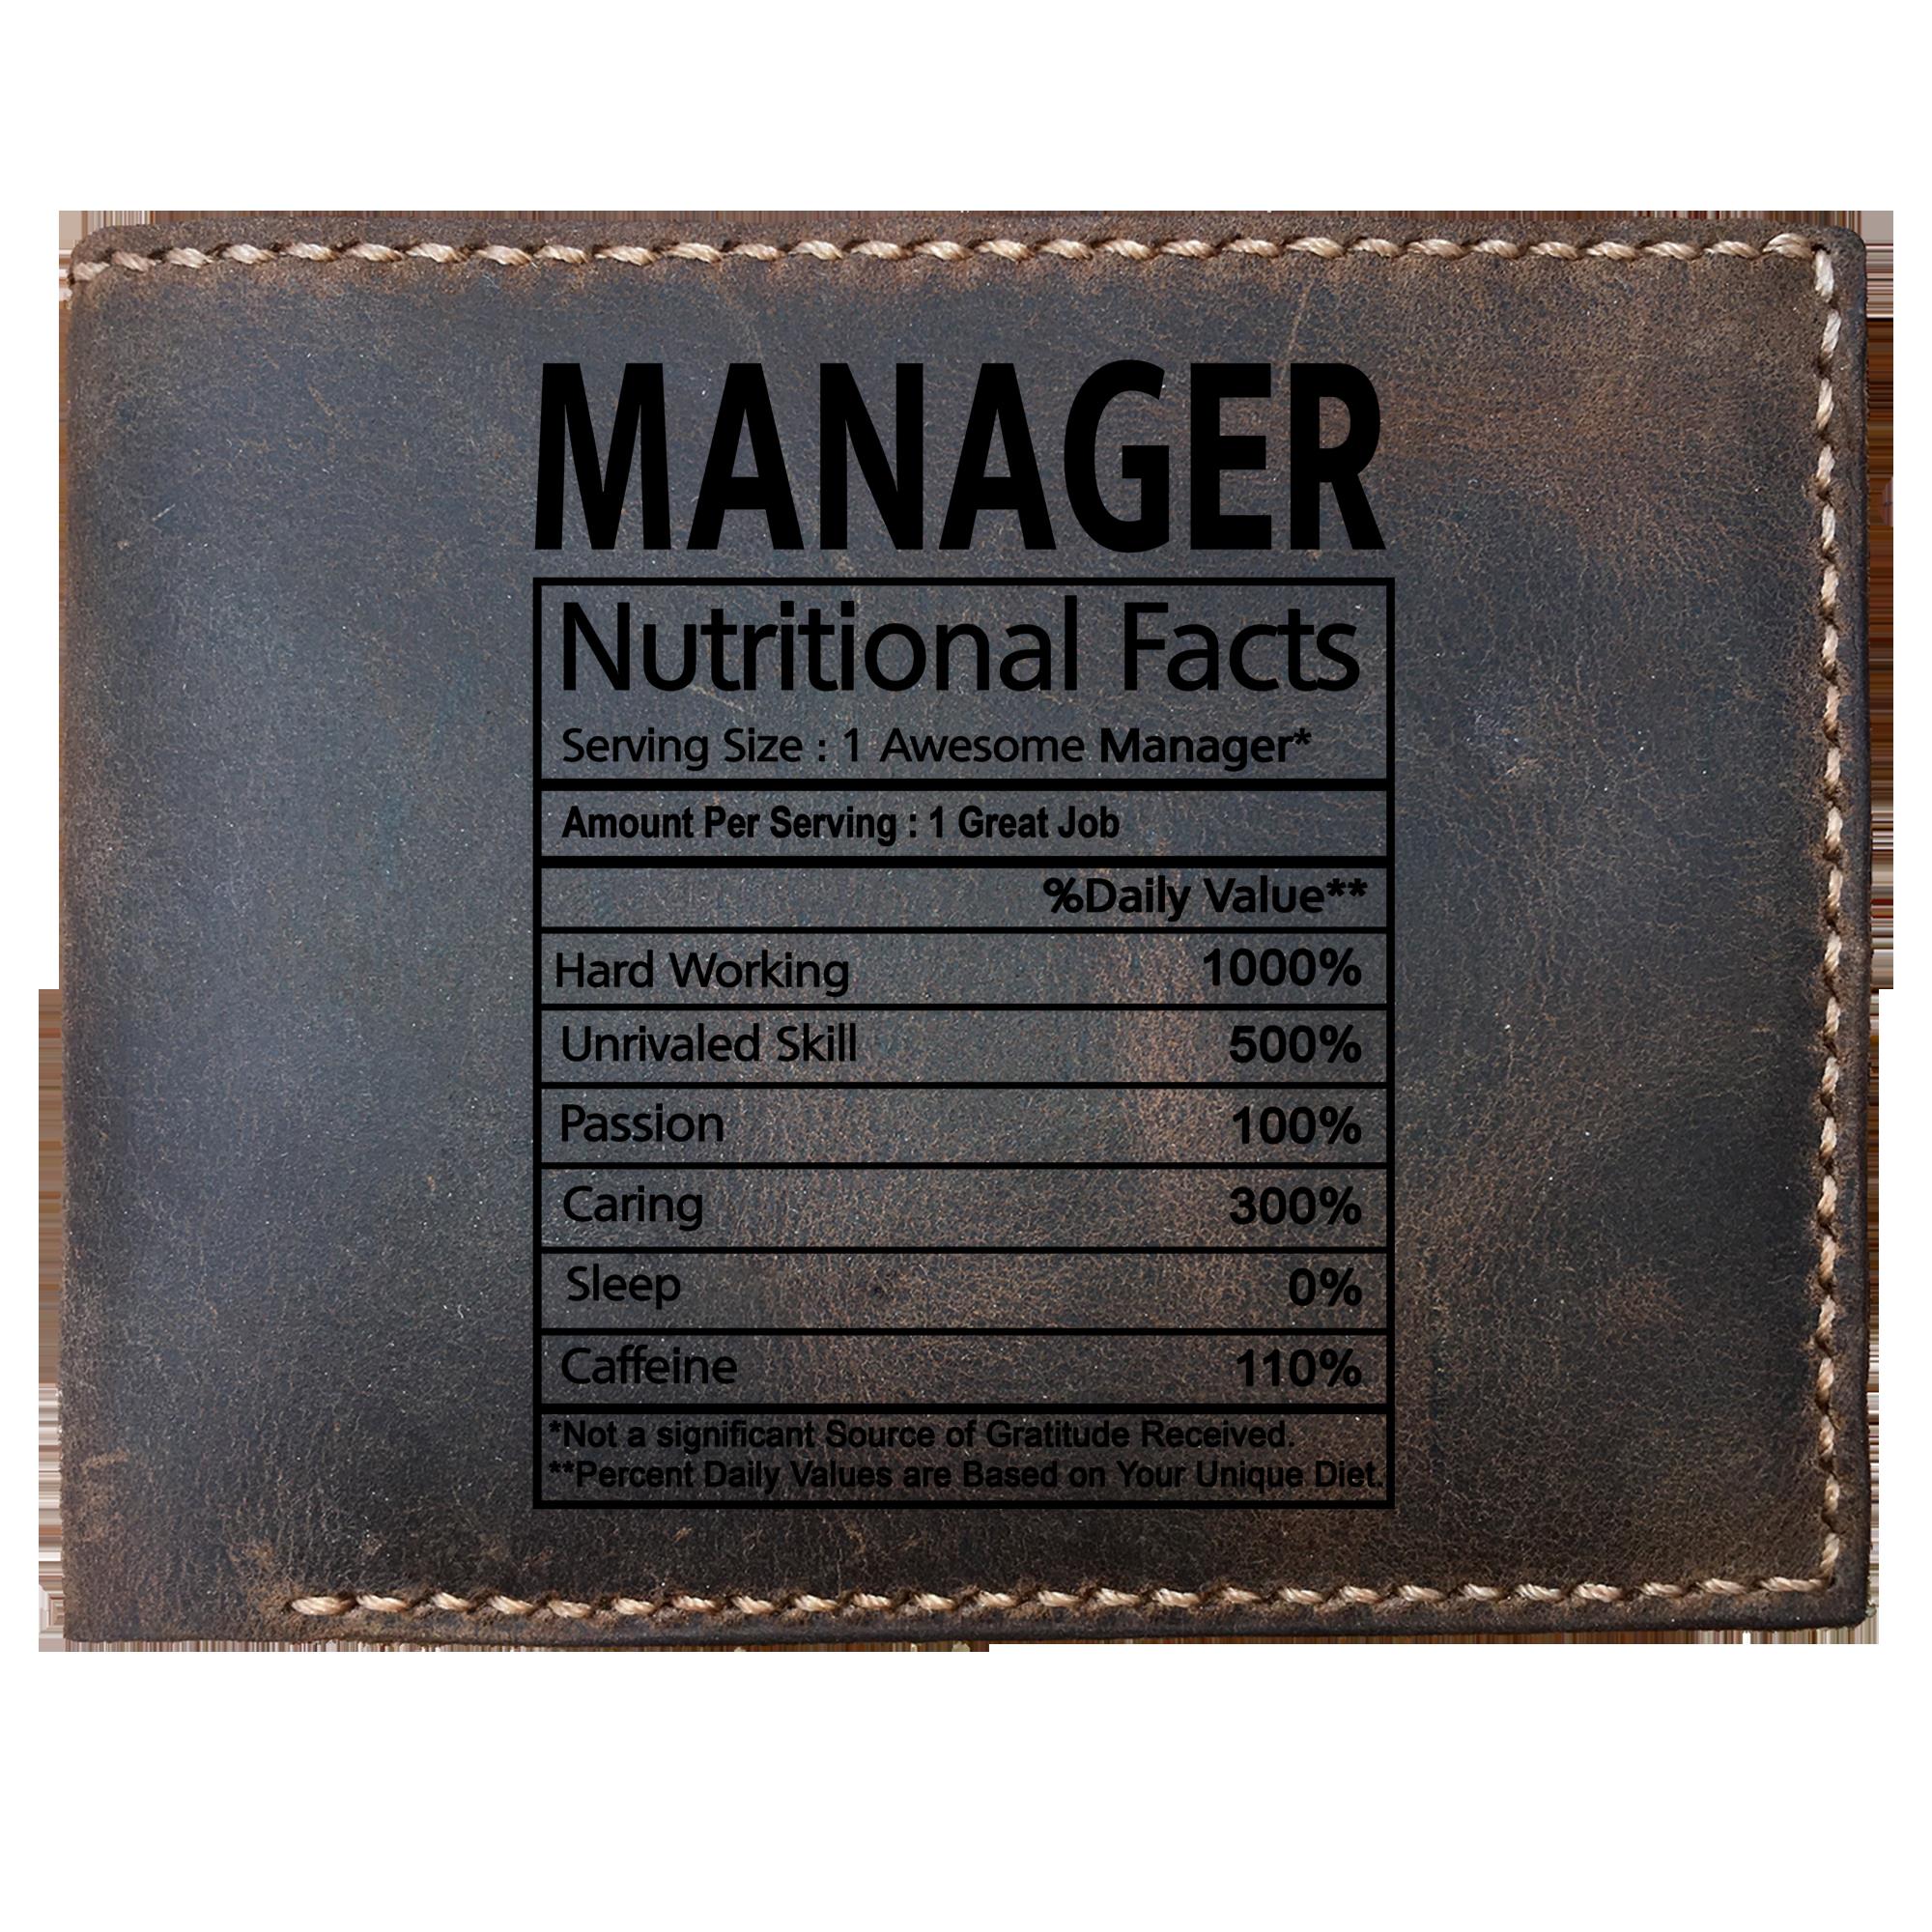 Skitongifts Funny Custom Laser Engraved Bifold Leather Wallet For Men, Manager Nutritional Facts